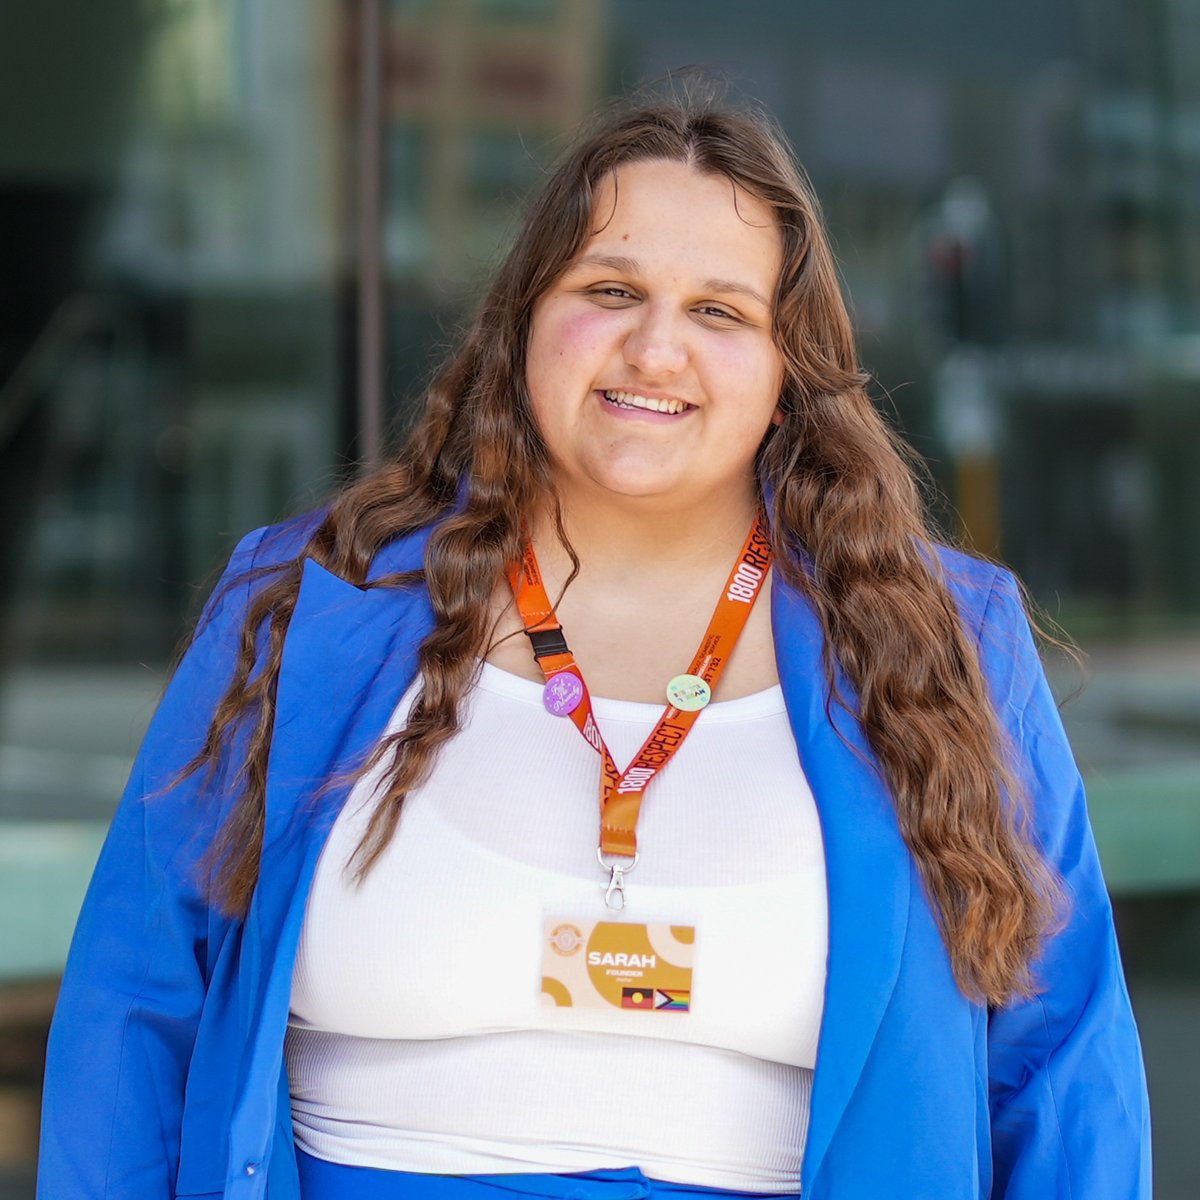 Sarah Williams, Bachelor of Laws student Sarah Williams is the founder of What Were You Wearing, a community organisation by survivors, for survivors that aims to increase awareness, education, and advocate against sexual assault.